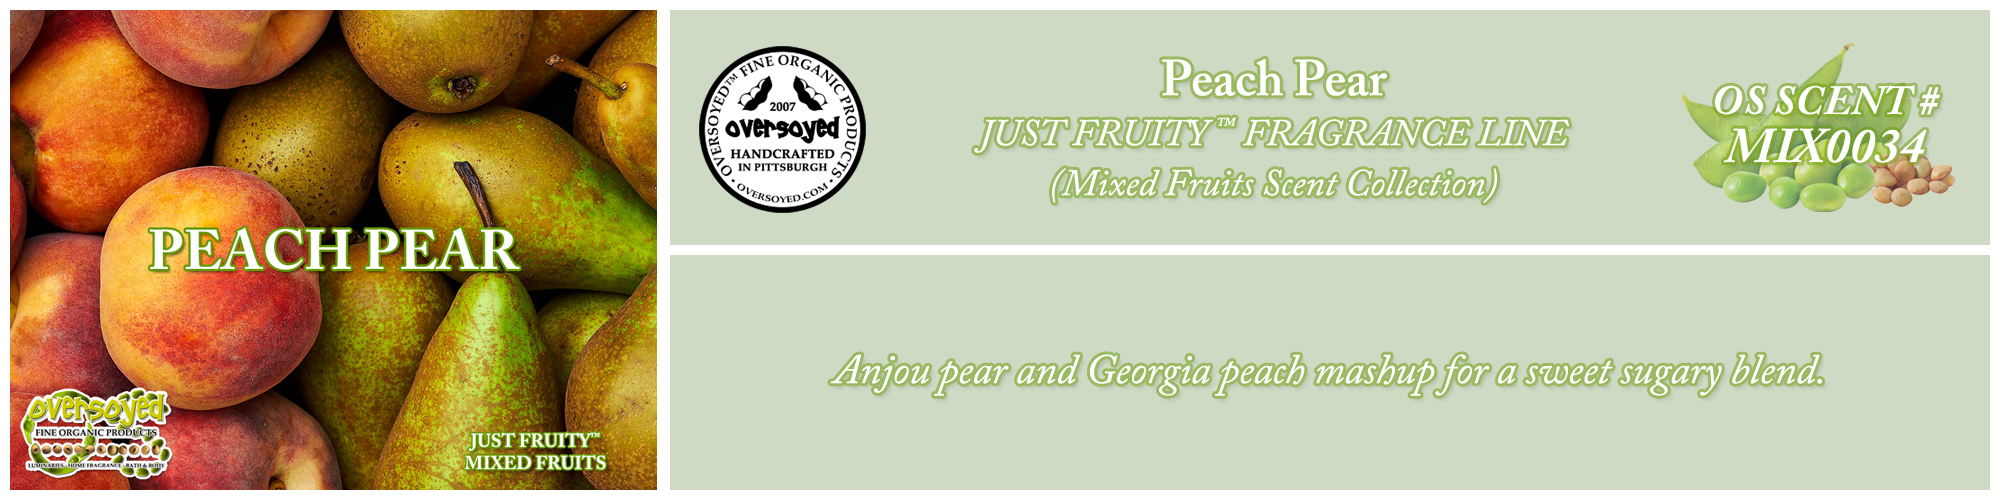 Peach Pear Handcrafted Products Collection